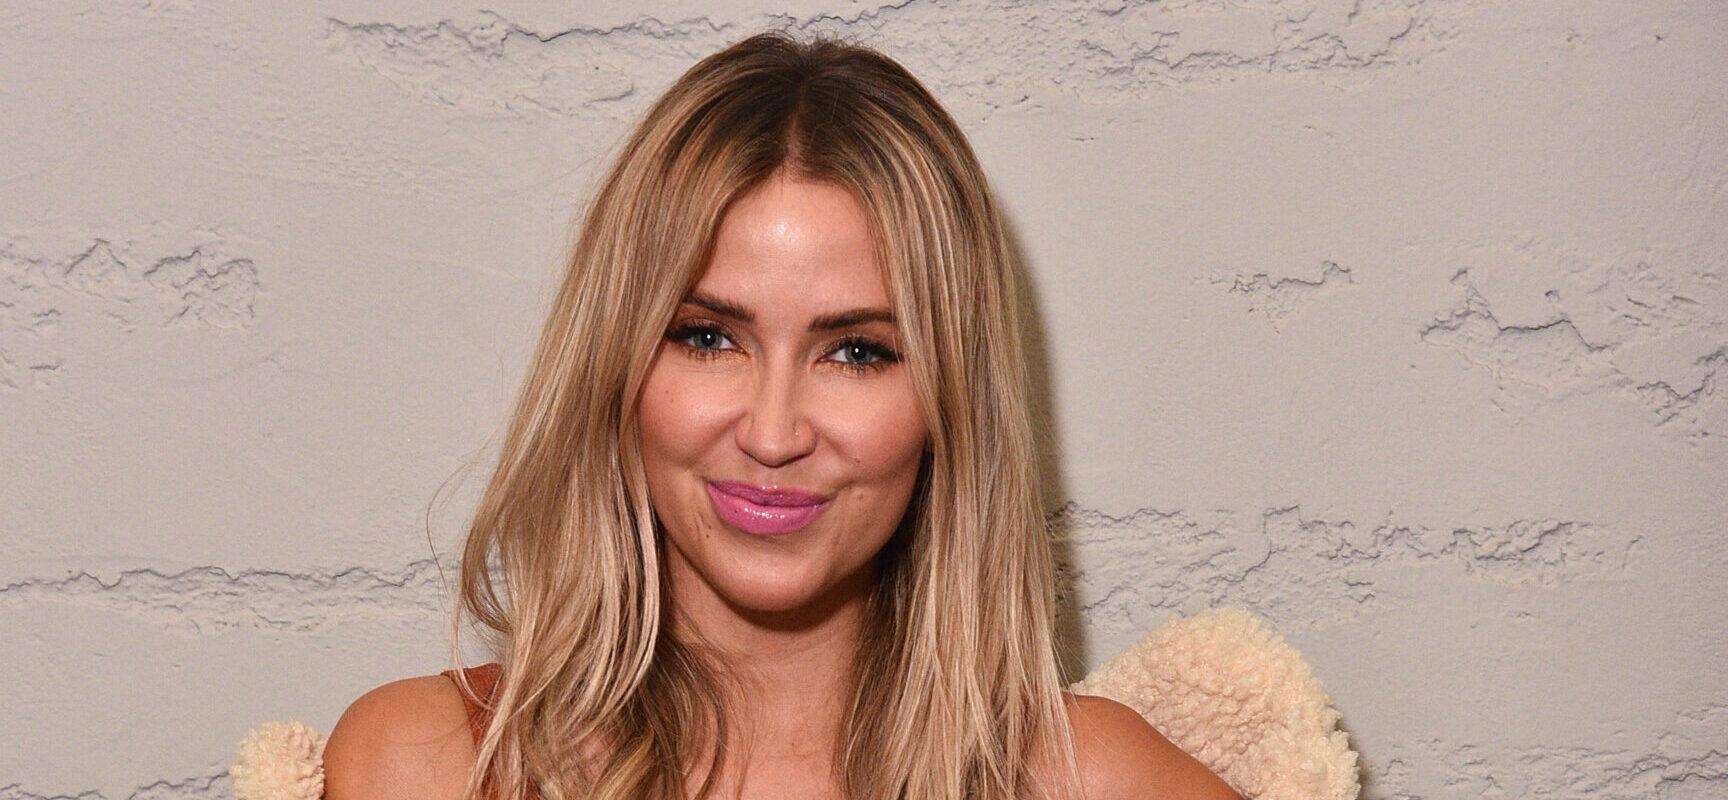 Kaitlyn Bristowe On Her Relationship With Her Dad: ‘He’s My Rock’